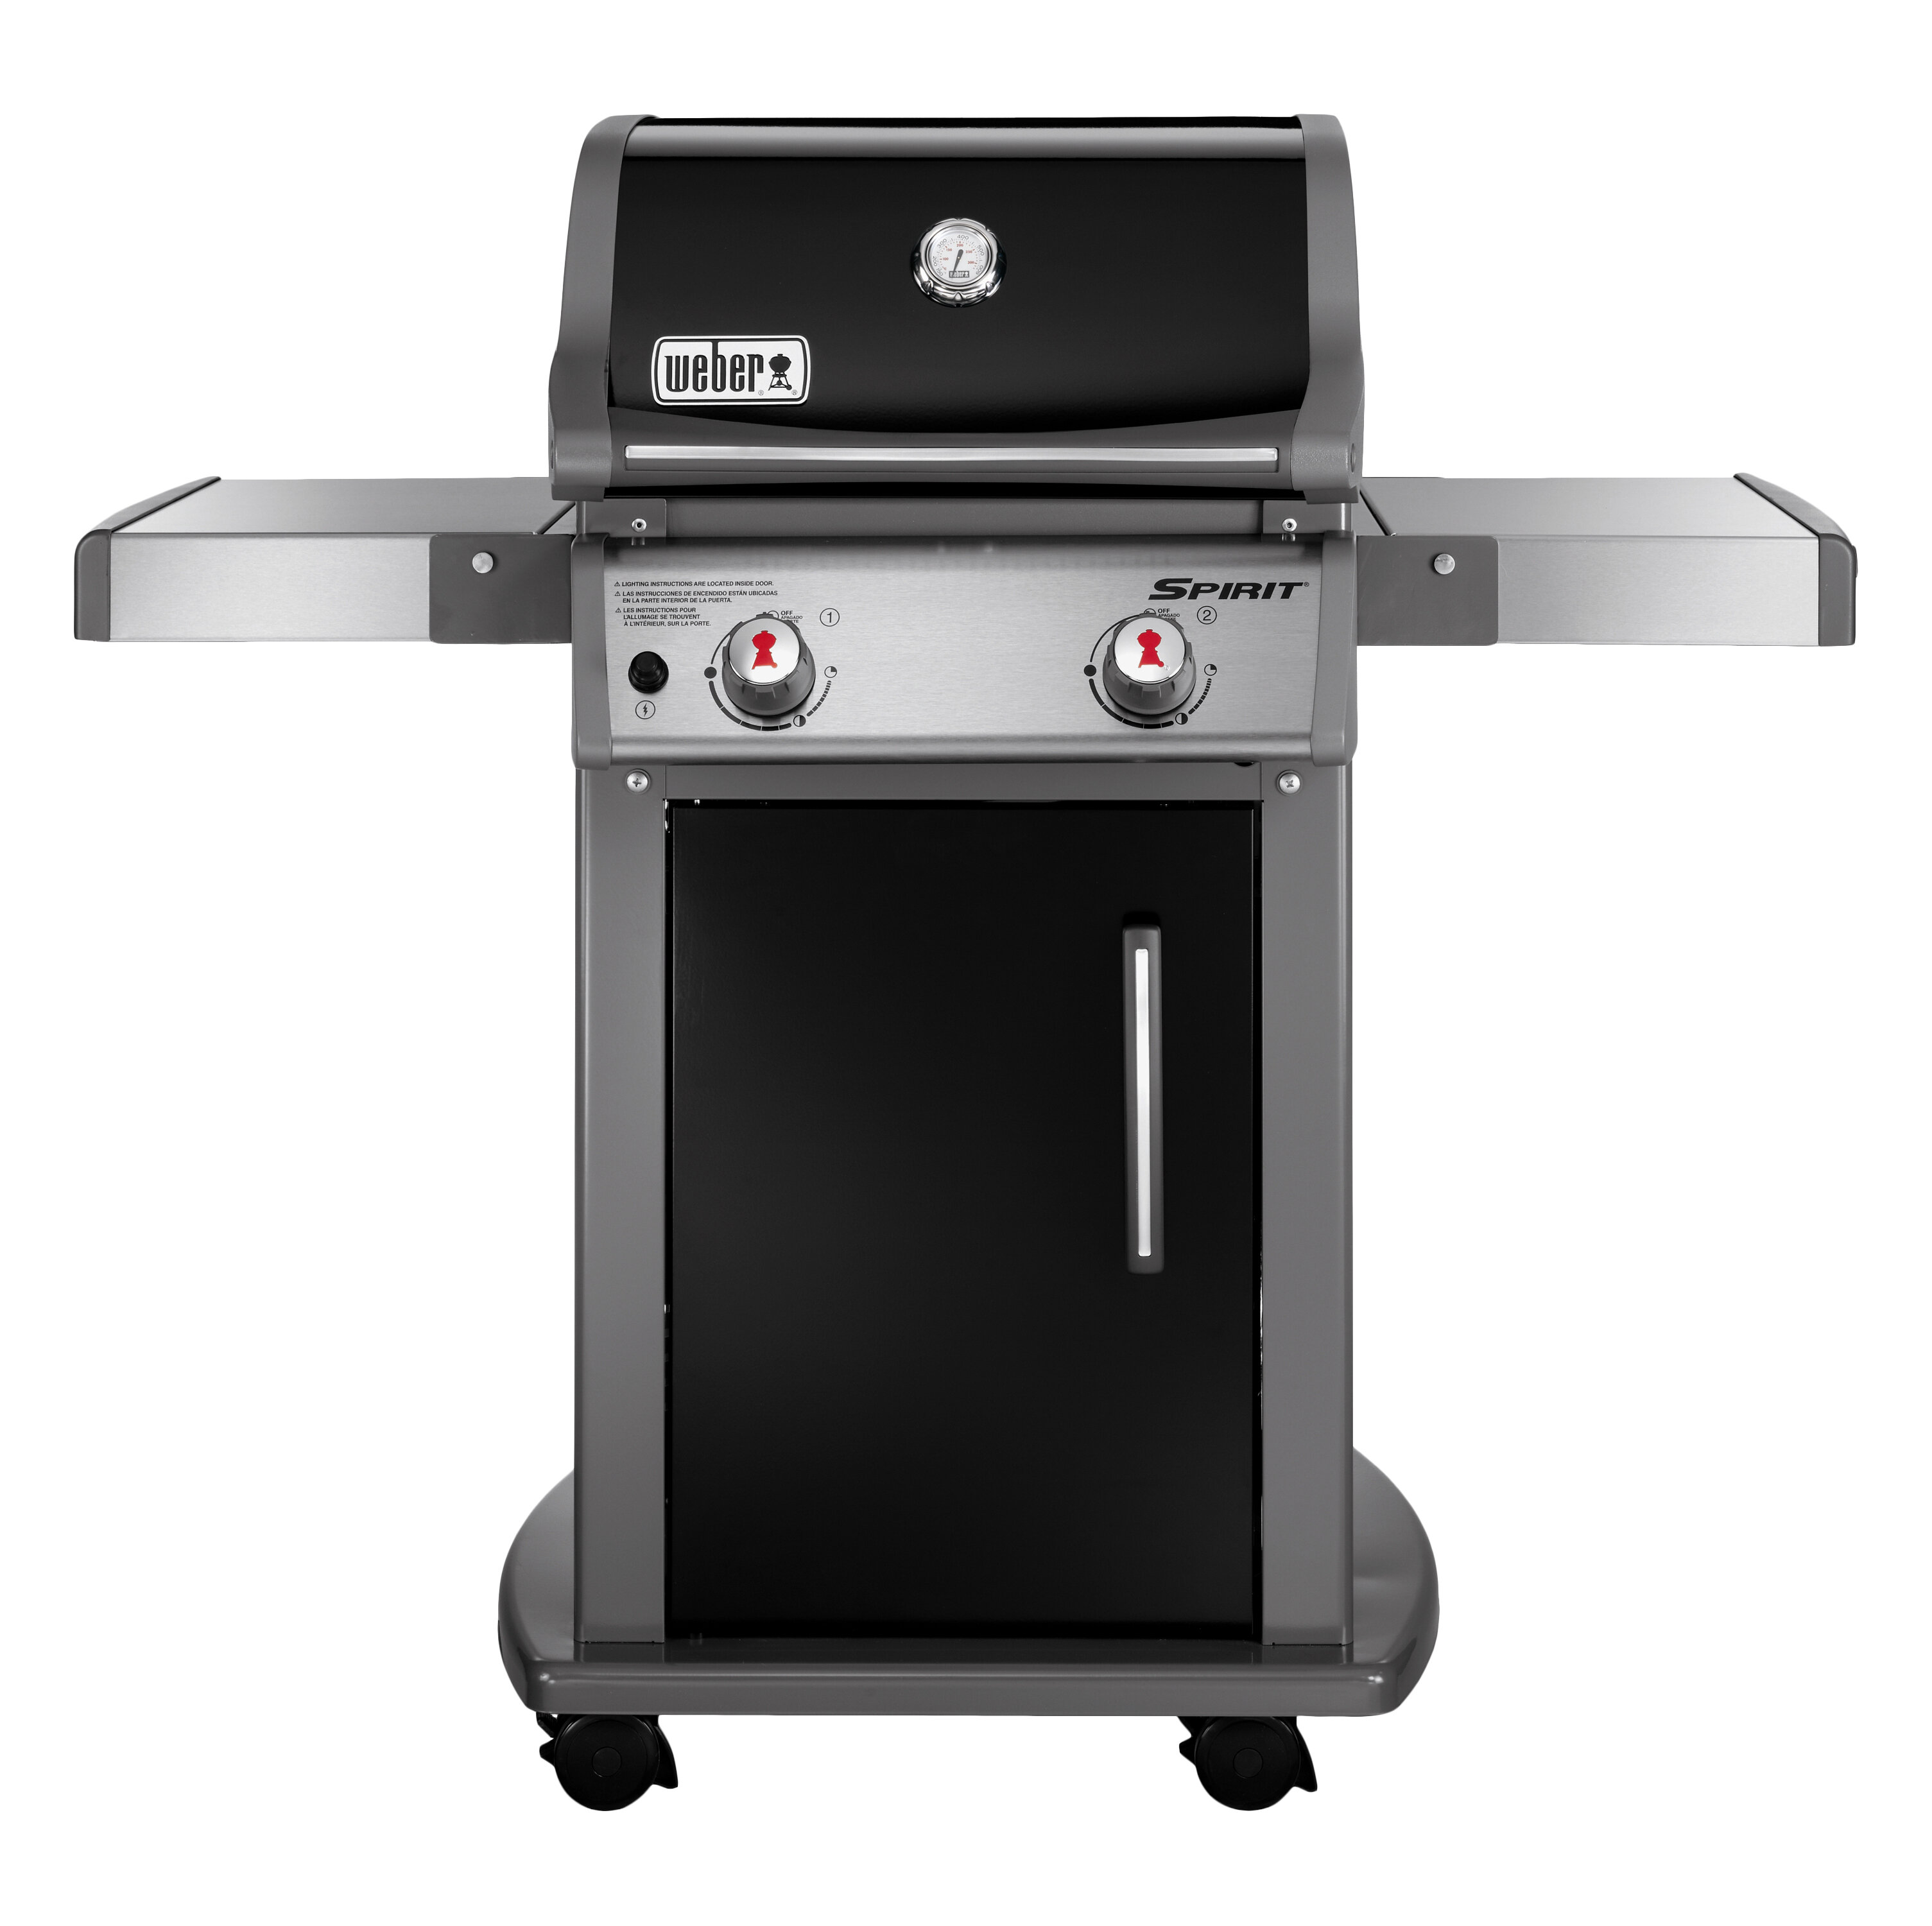 Weber Spirit E 210 2 Burner Propane Gas Grill With Cabinet Reviews Wayfair,Indoor Grill Built In